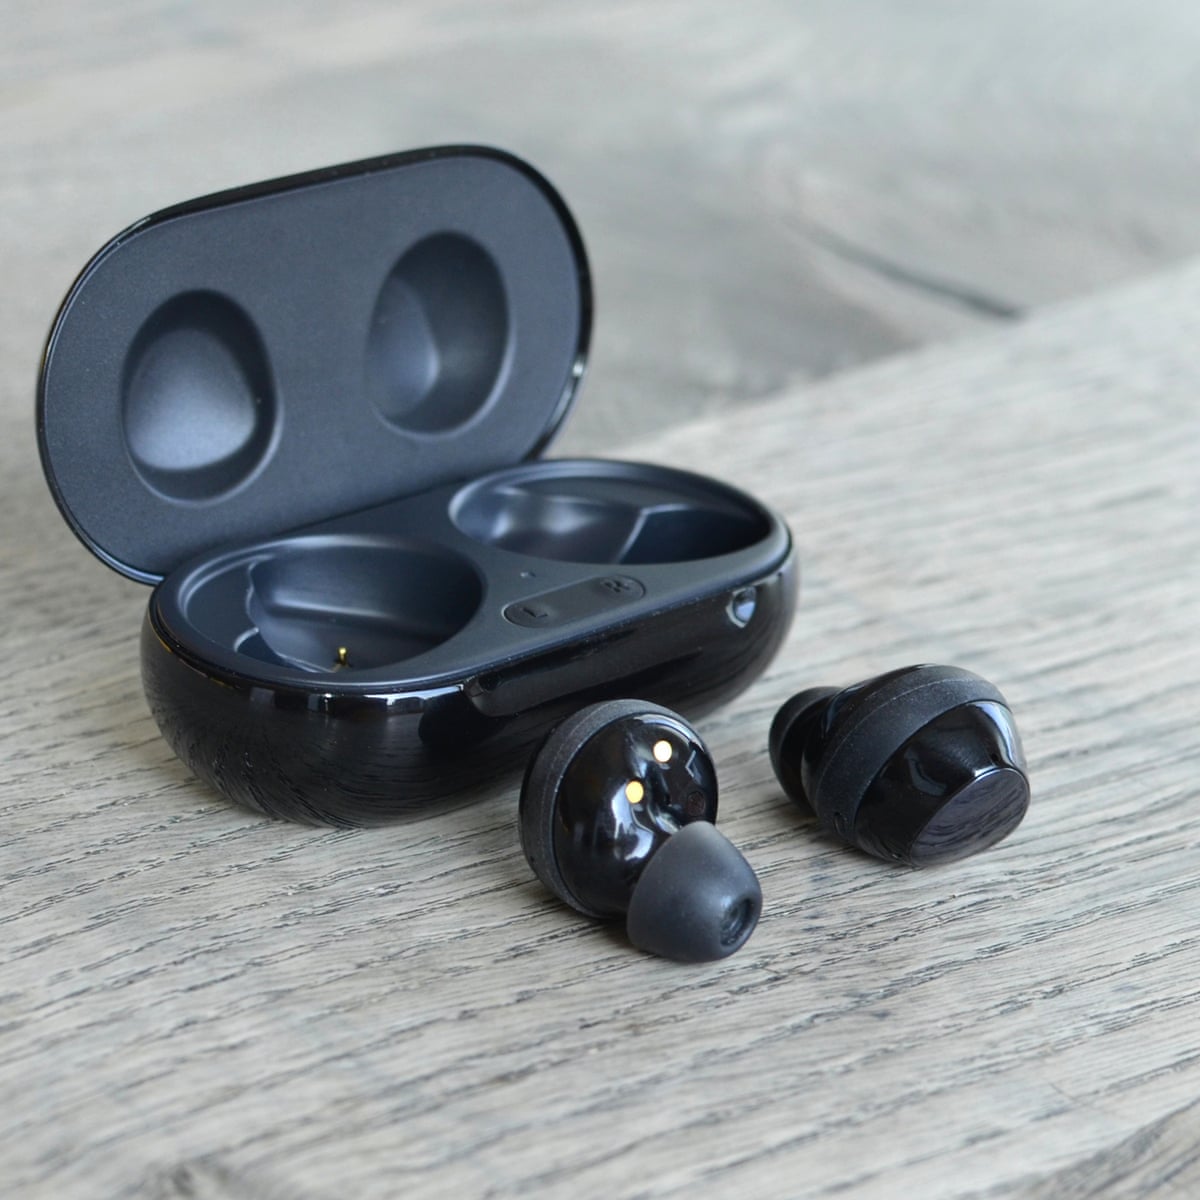 Google Pixel Buds vs Samsung Galaxy Buds Plus: Which one is better?